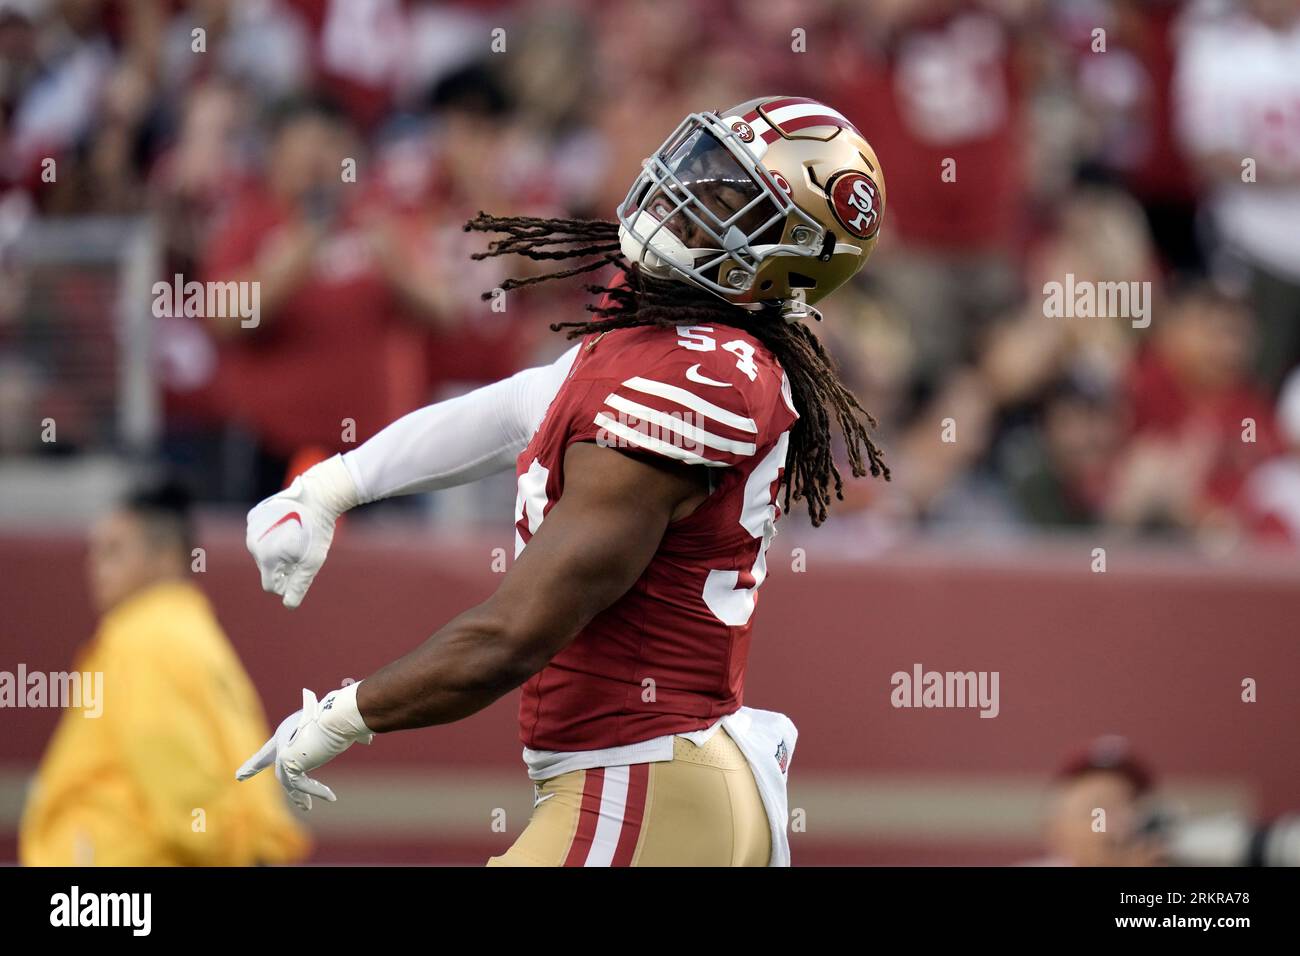 san francisco 49ers vs los angeles chargers